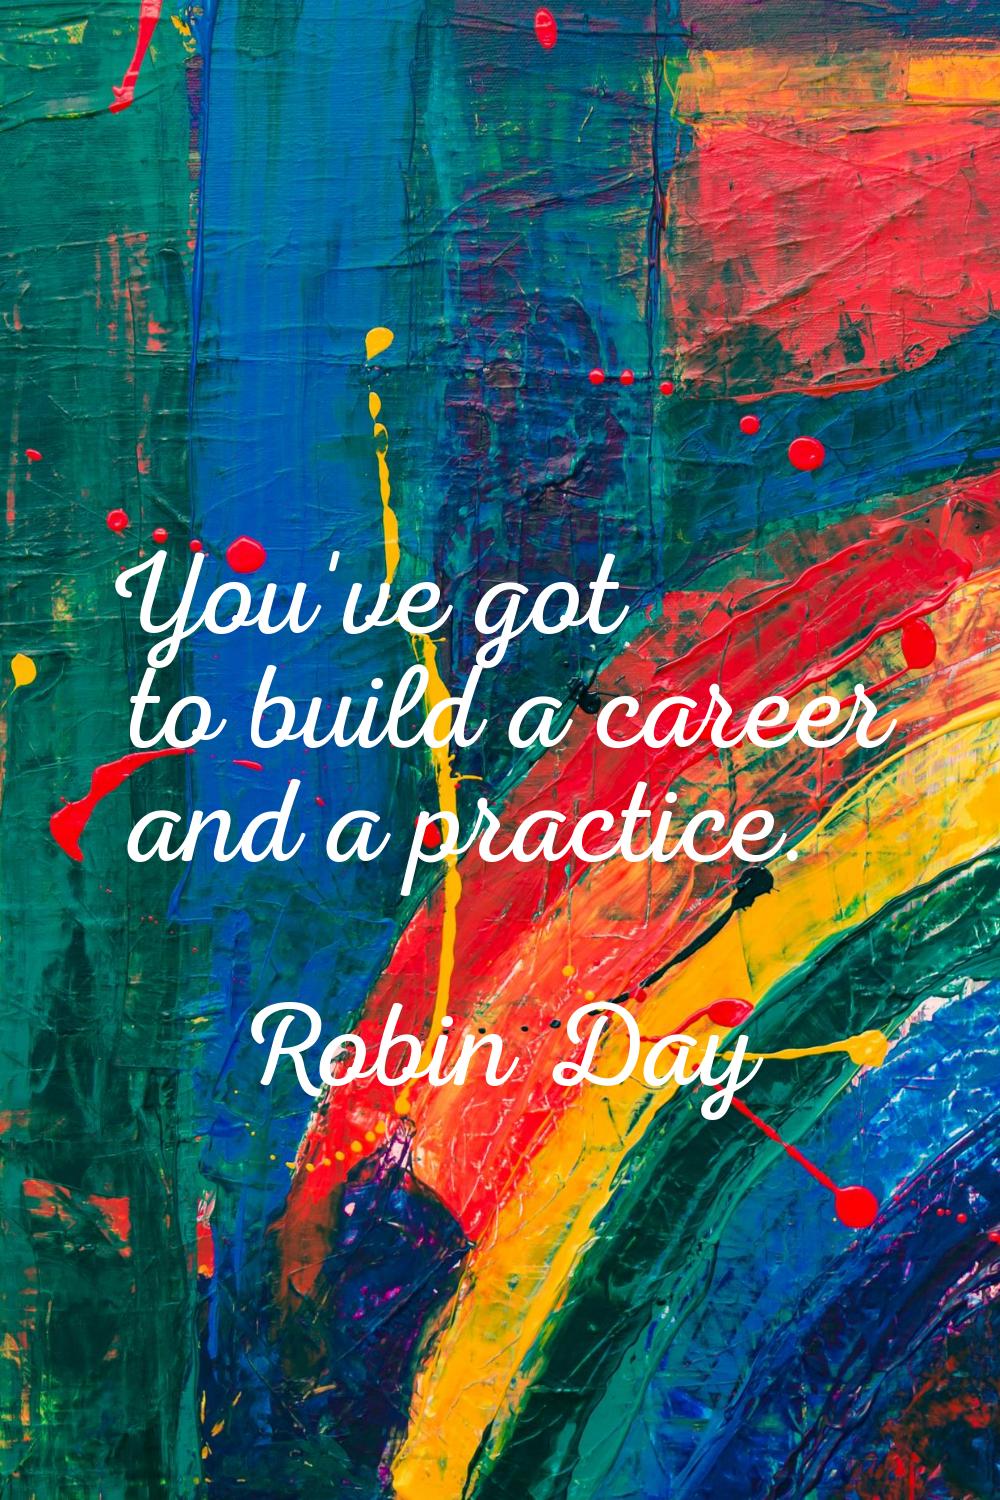 You've got to build a career and a practice.